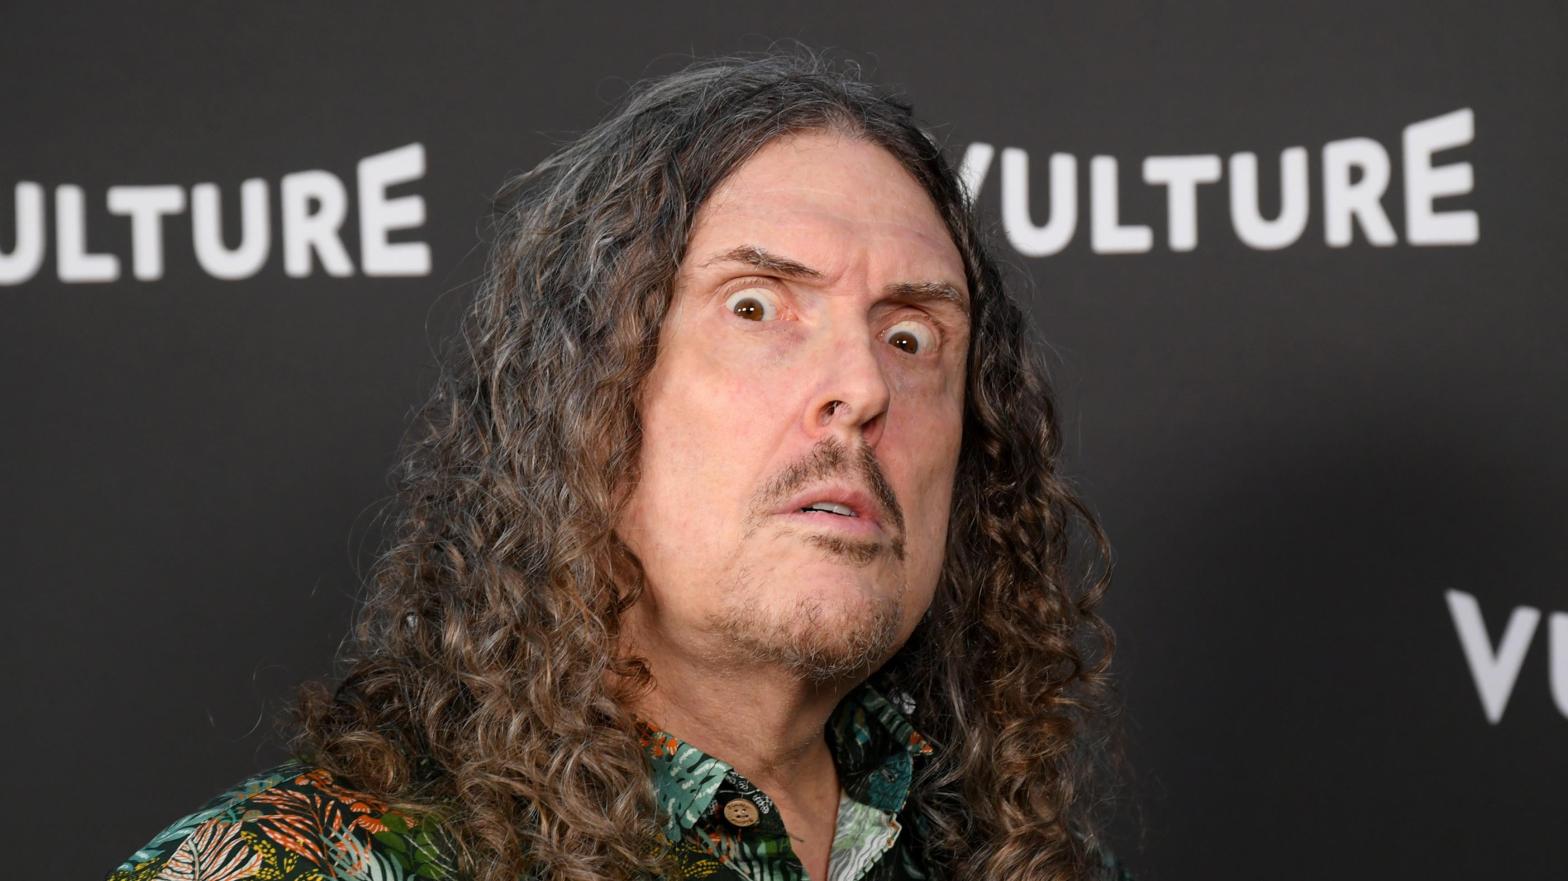 Weird Al Uses His Spotify Wrapped Video to Dunk on Spotify